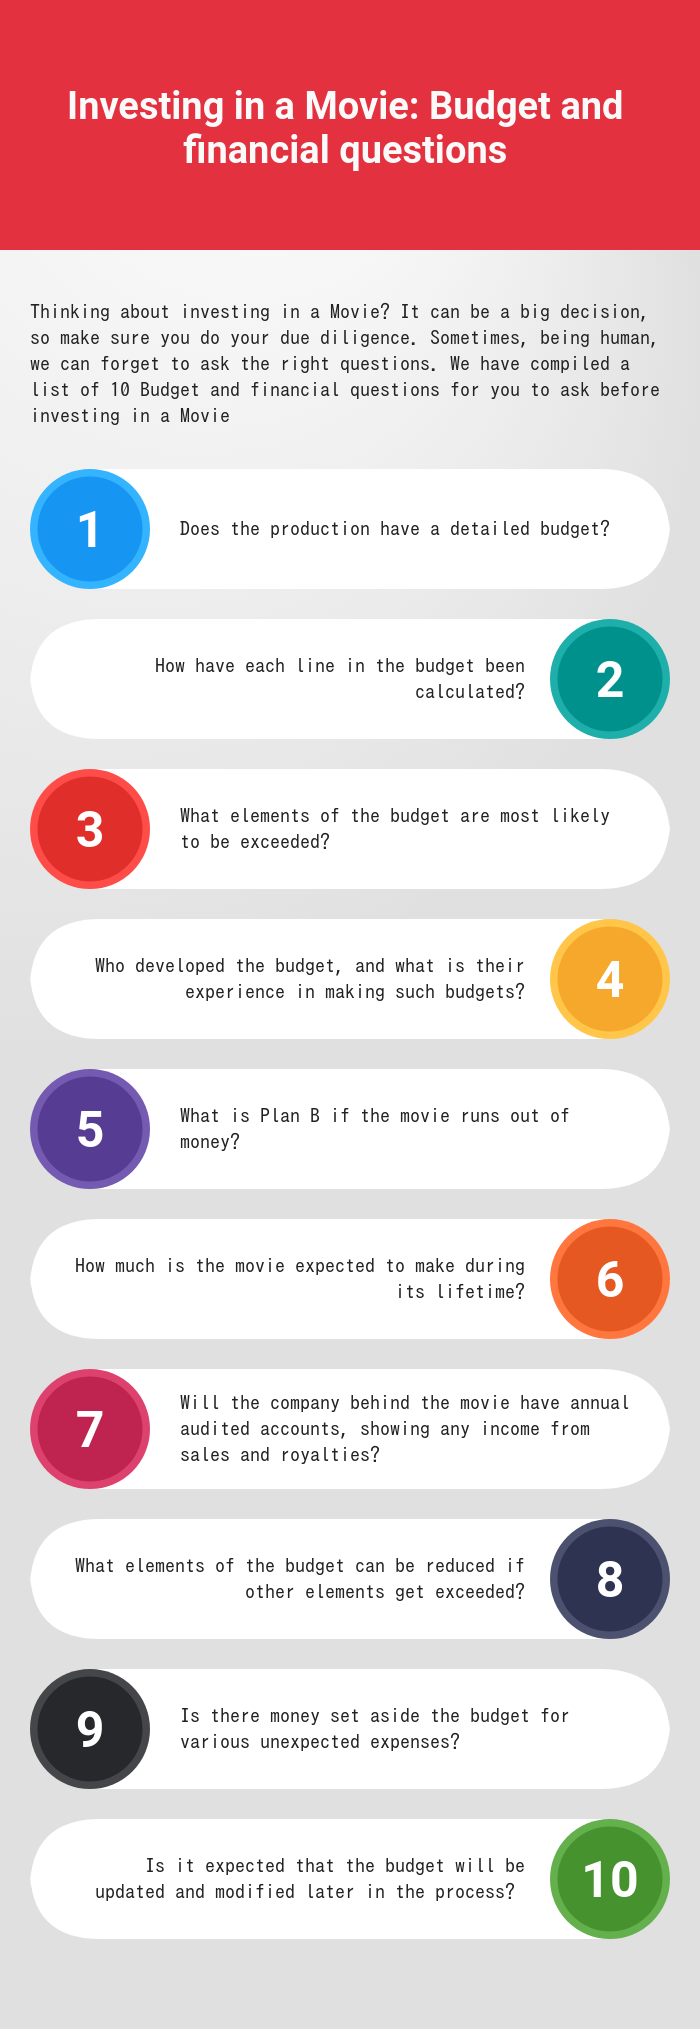 Investing in a Movie: Budget and financial questions